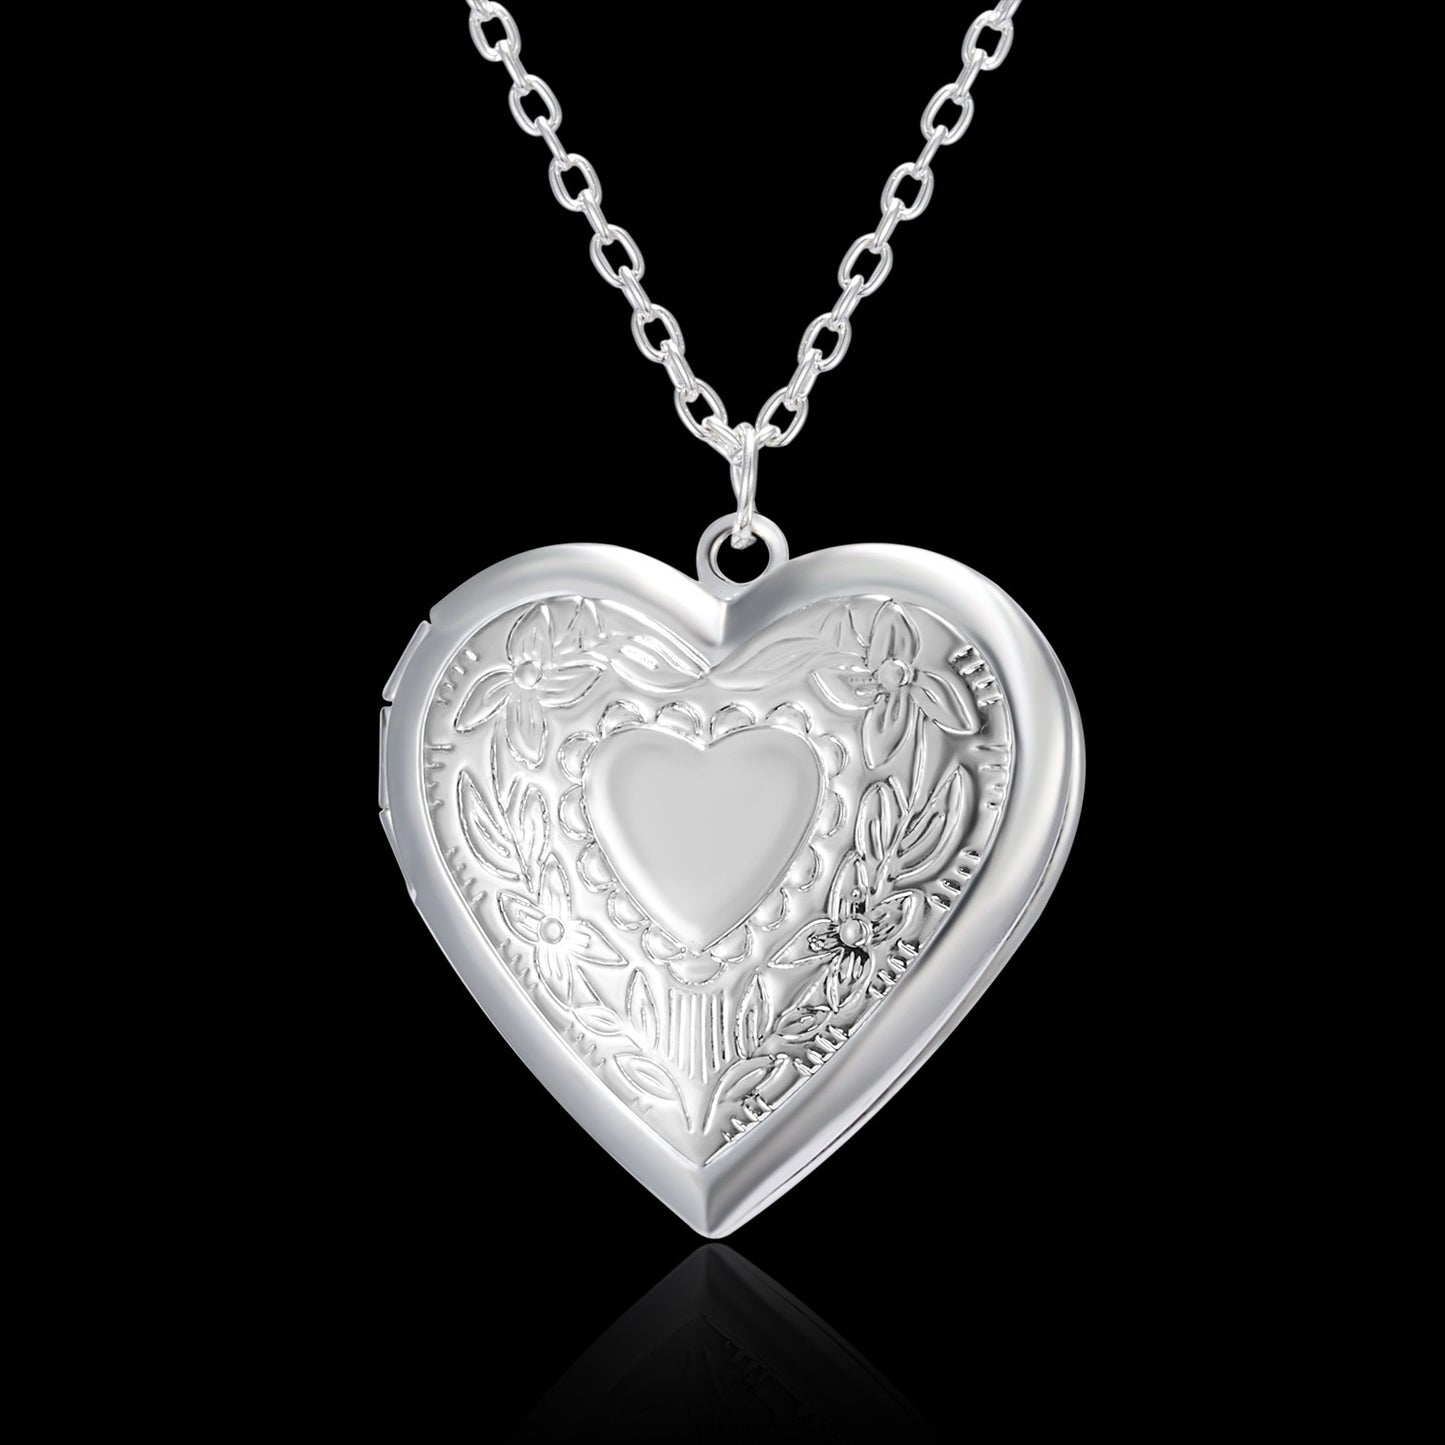 Carved Design Love Necklace Personalized Heart-shaped Photo Frame Pendant Necklace For Women Family Jewelry For Valentine's Day